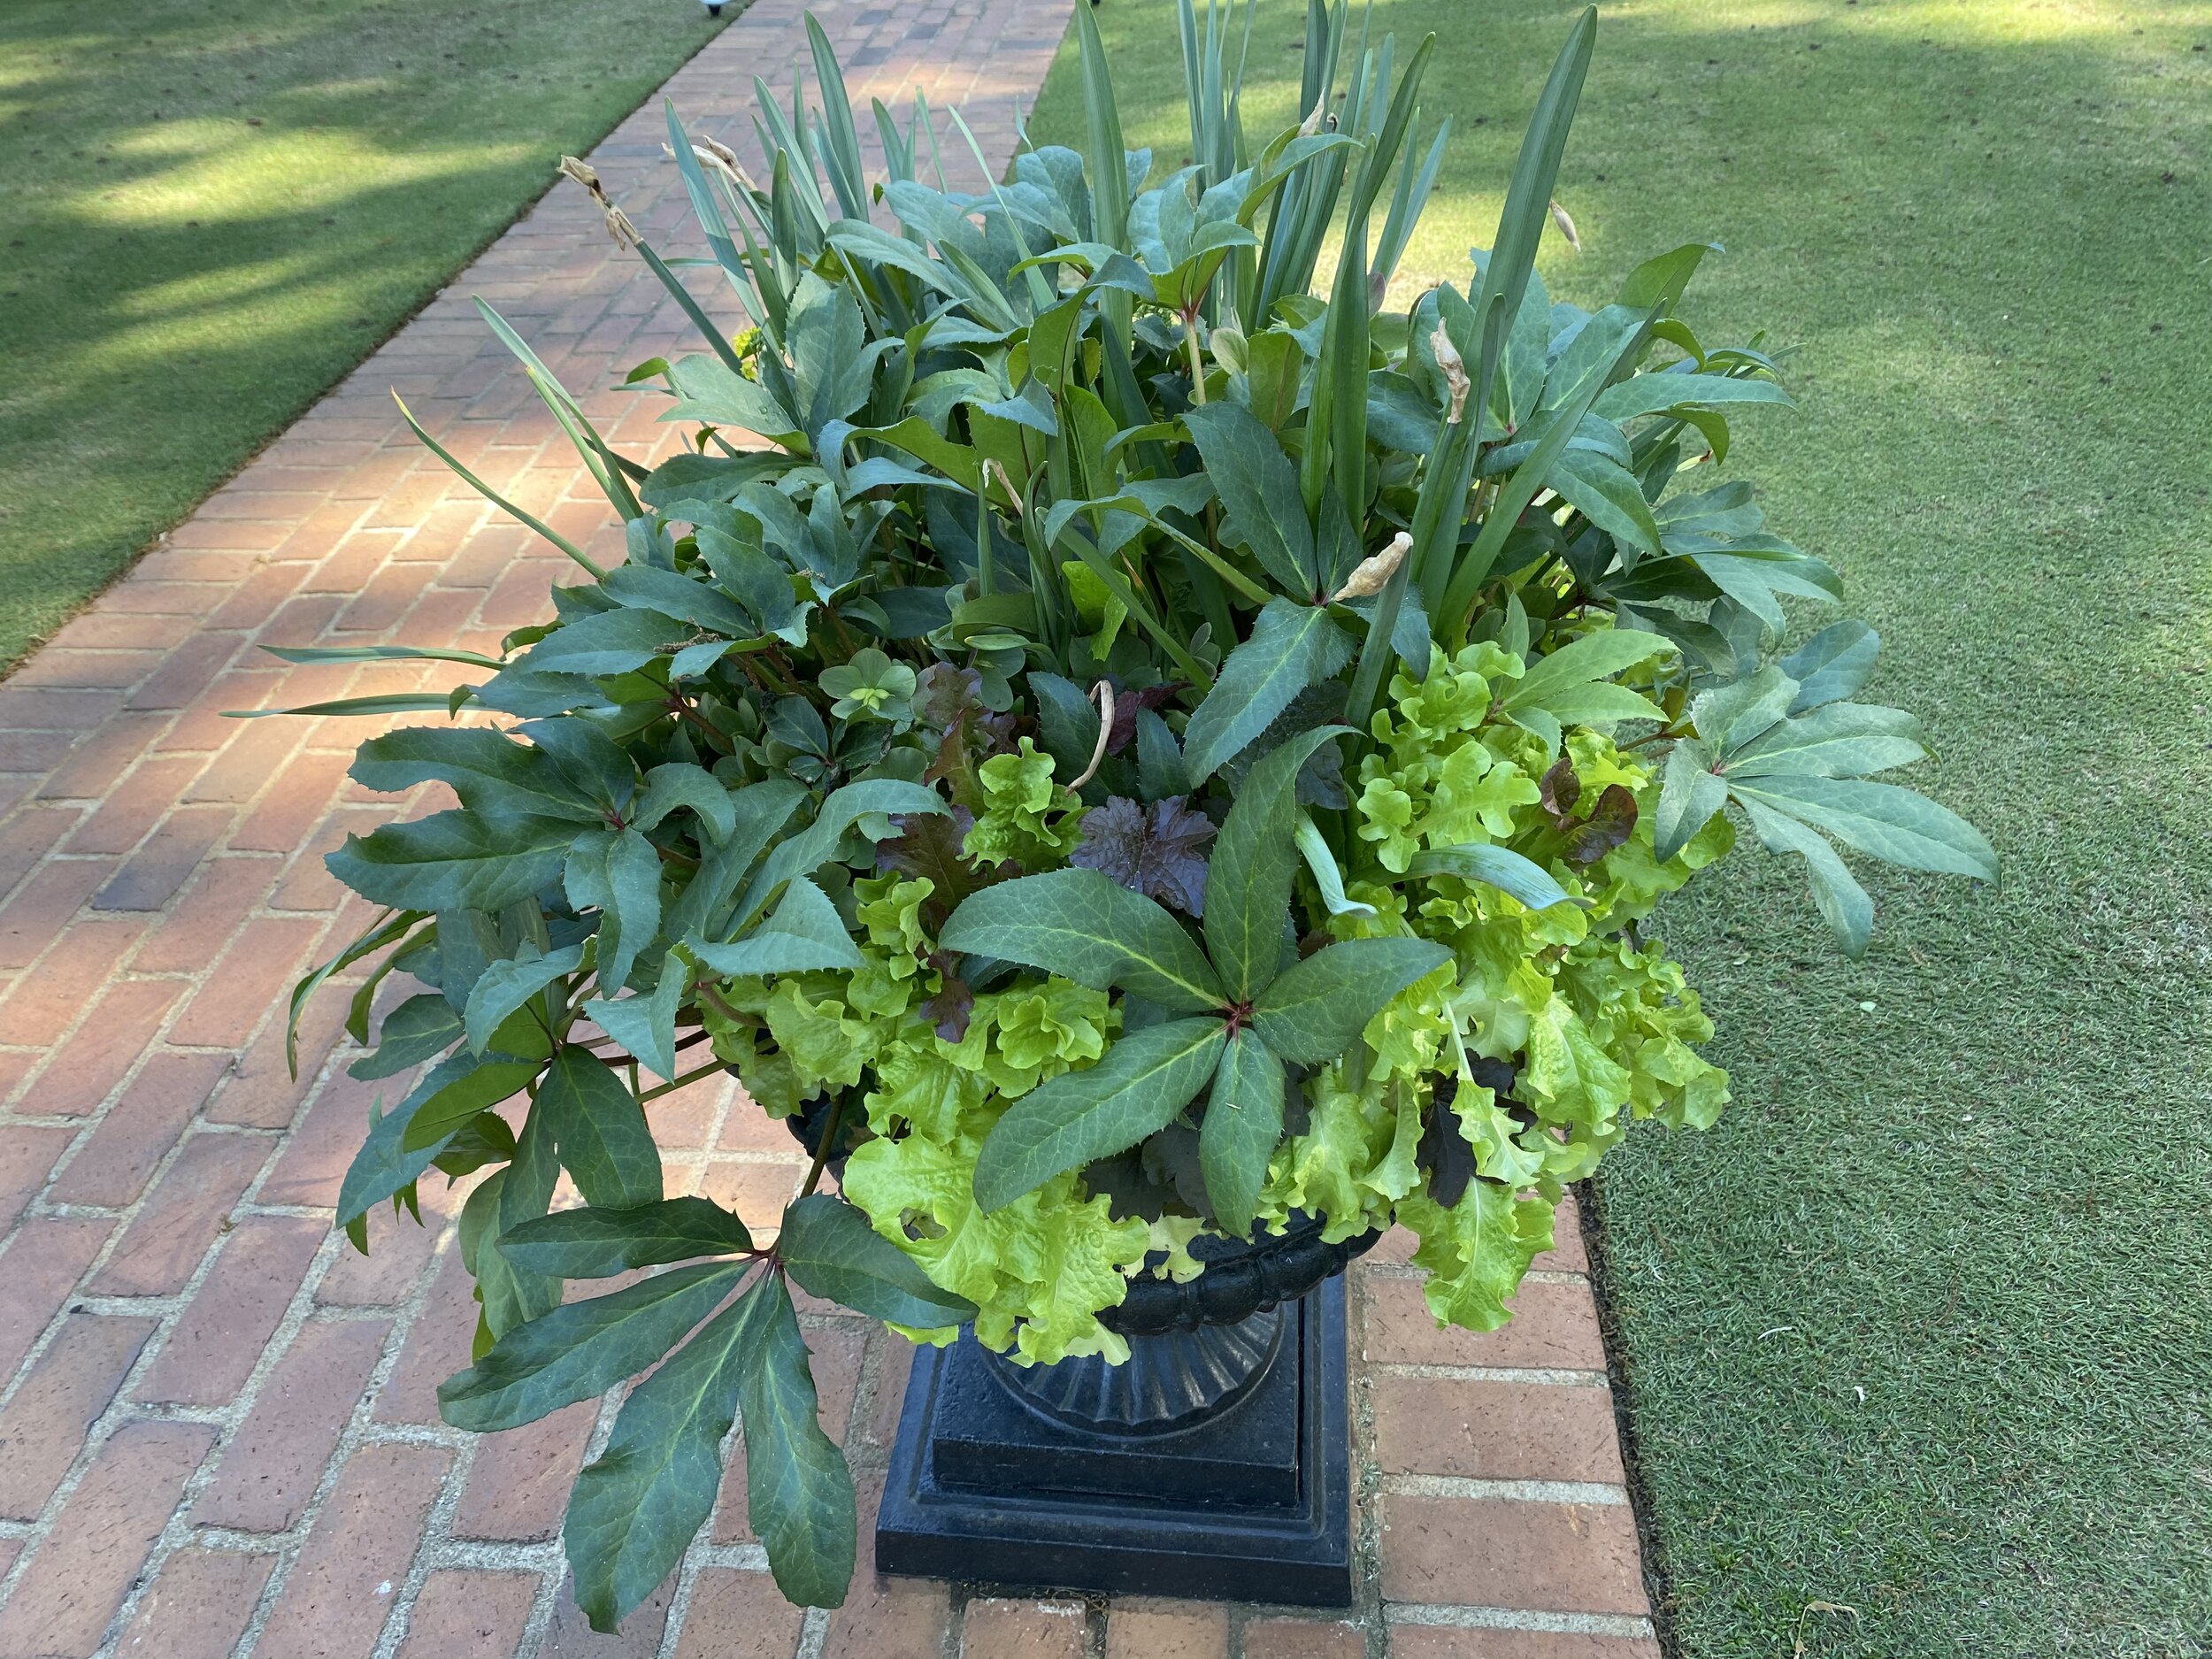 Lettuce and helleborus in a container